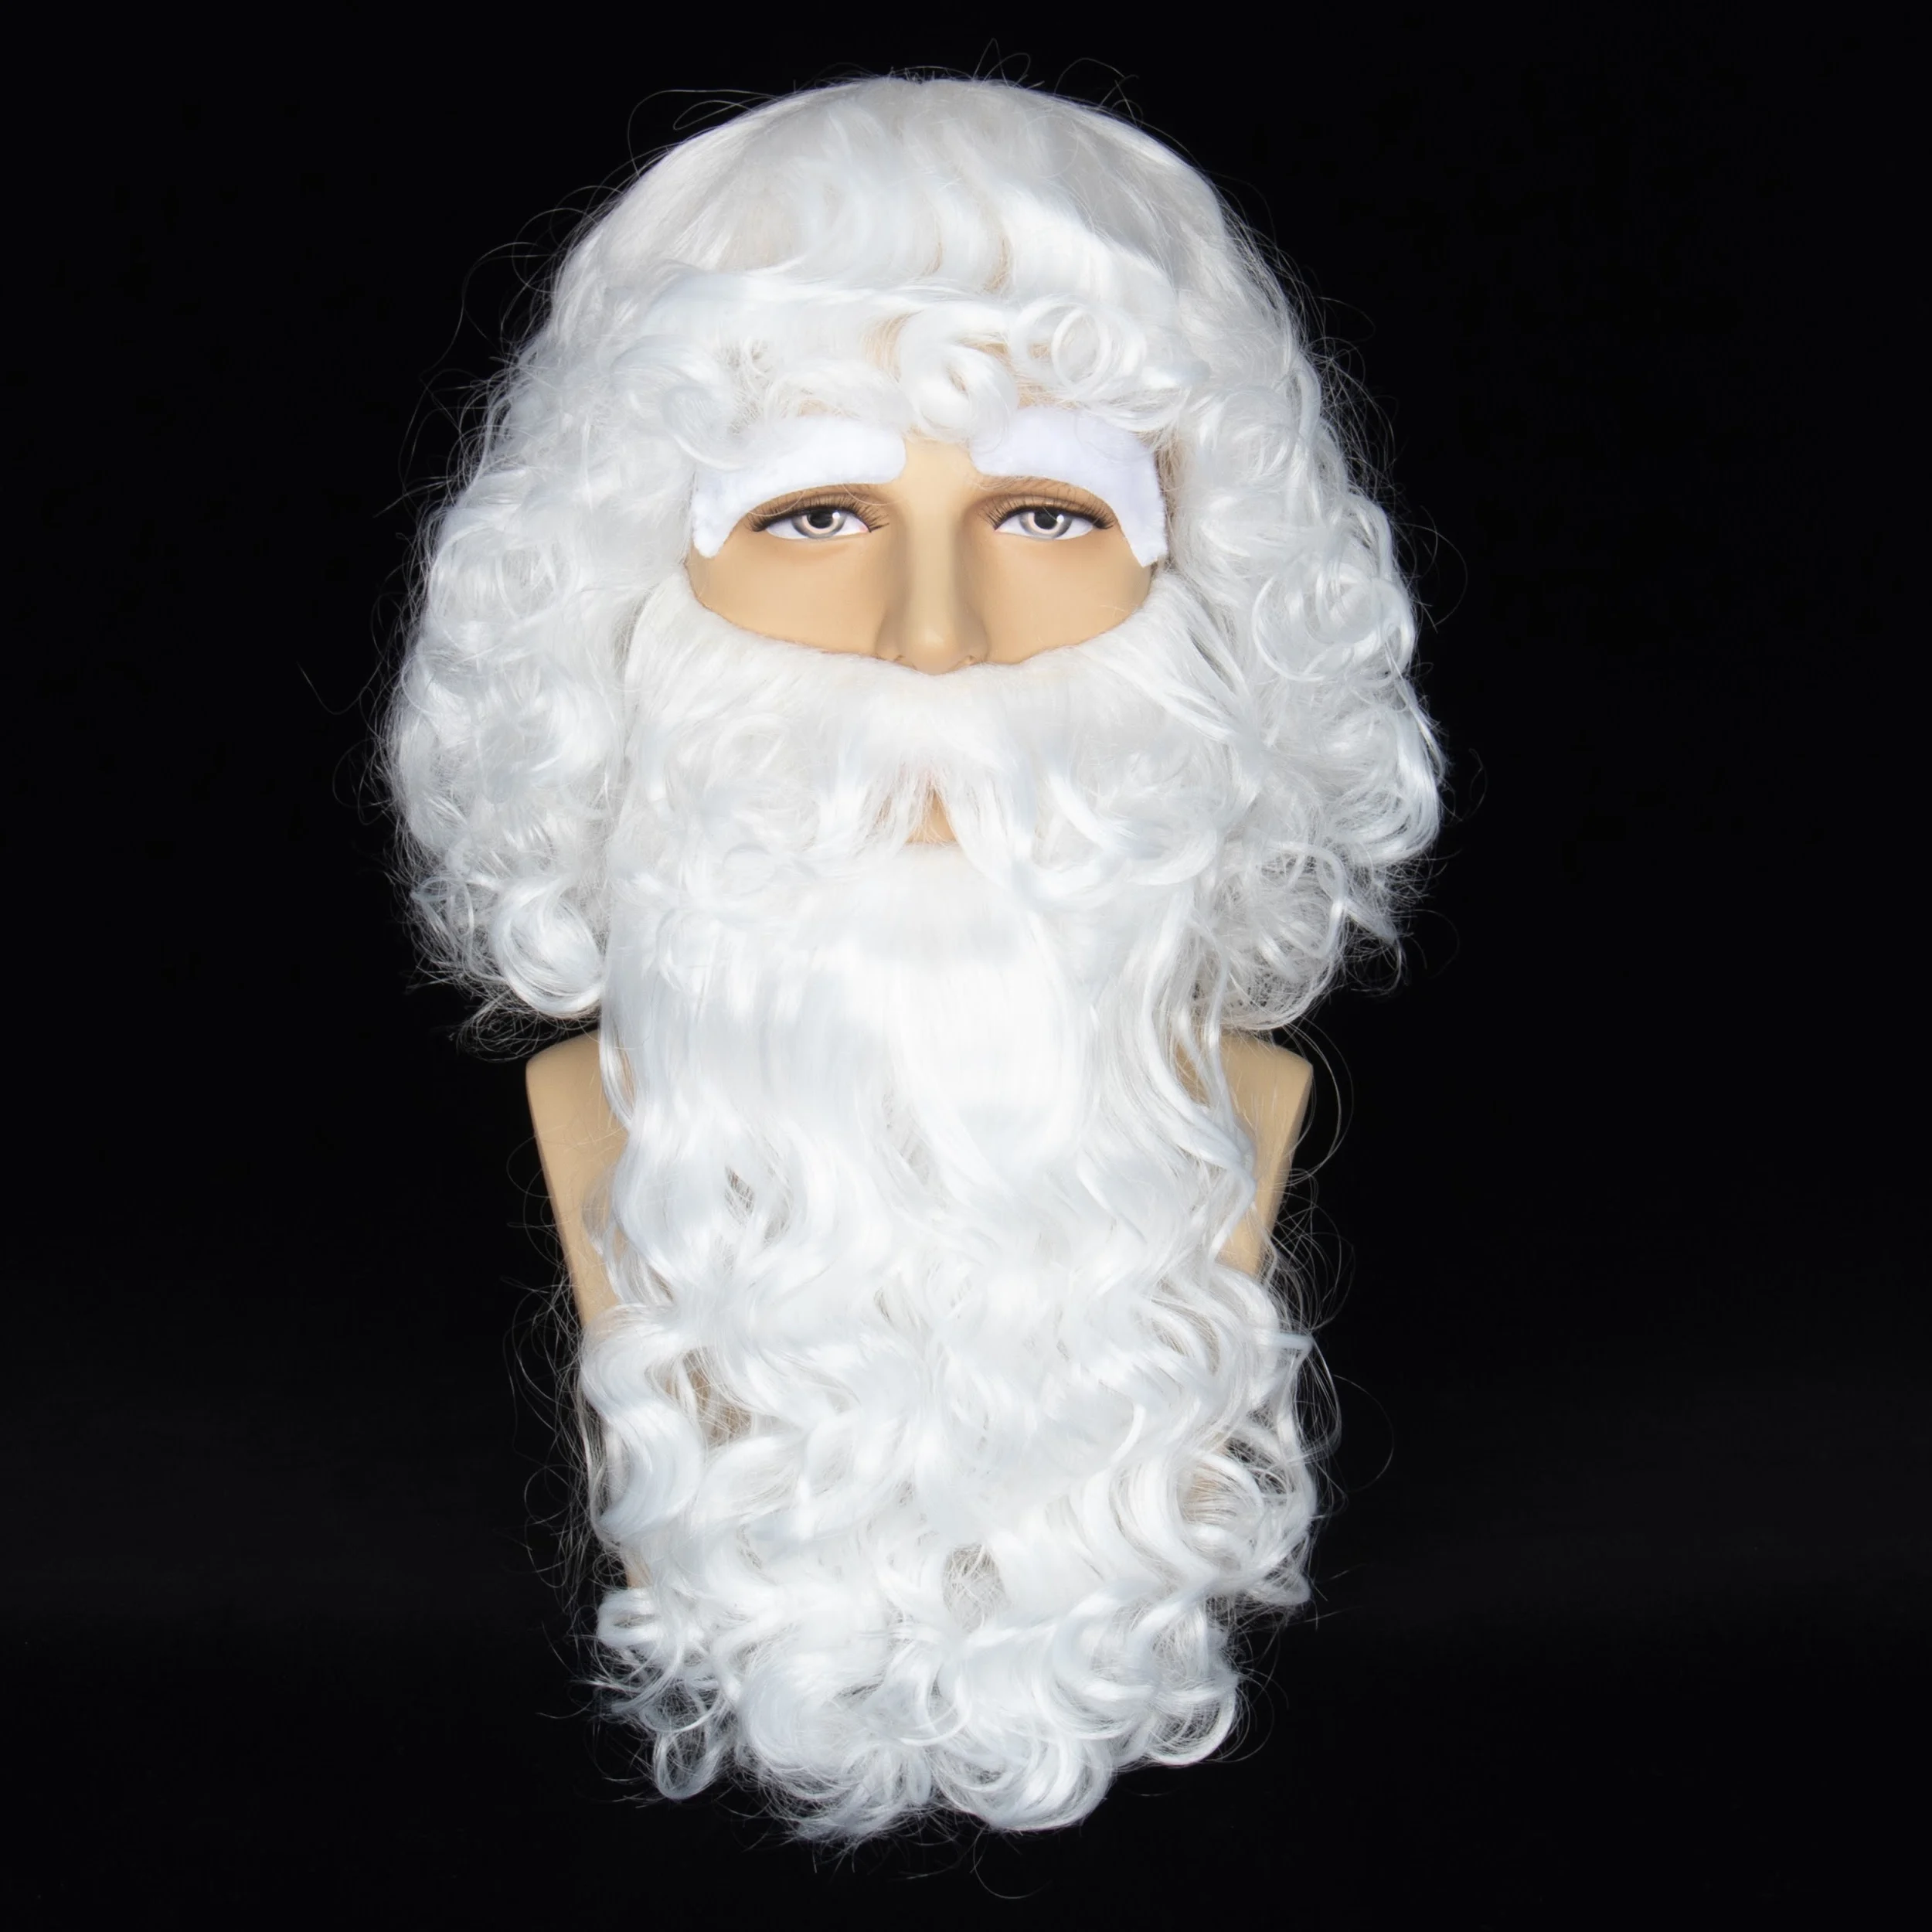 

Santa Claus Set Wig Beard Eyebrows White Curly Hair Men's Wigs For Christmas Cosplay Party